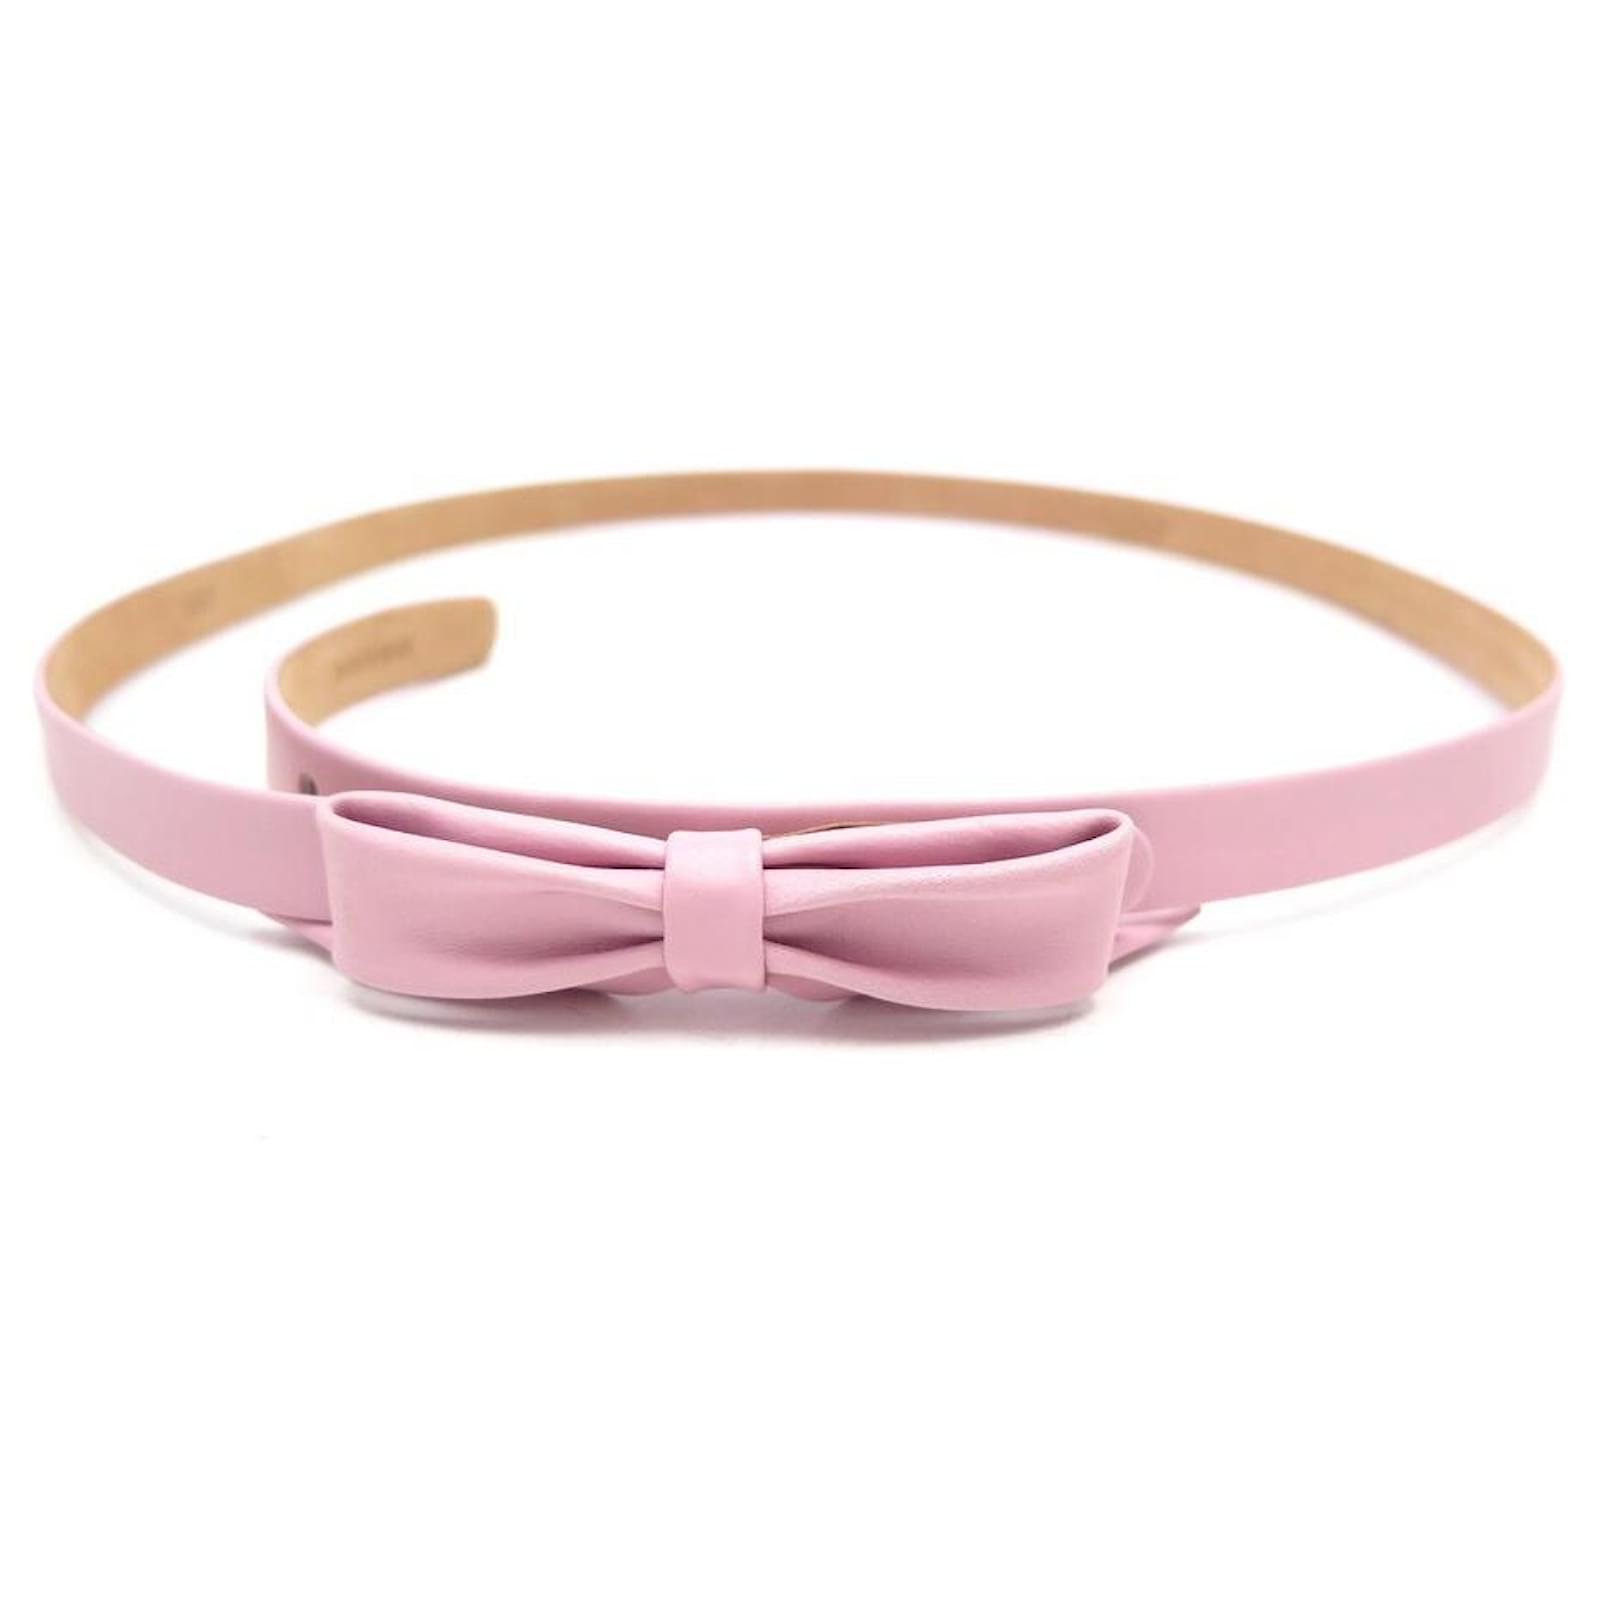 NEW BELT LOUIS VUITTON PINK BOW GM LEATHER T80 CM PINK LEATHER